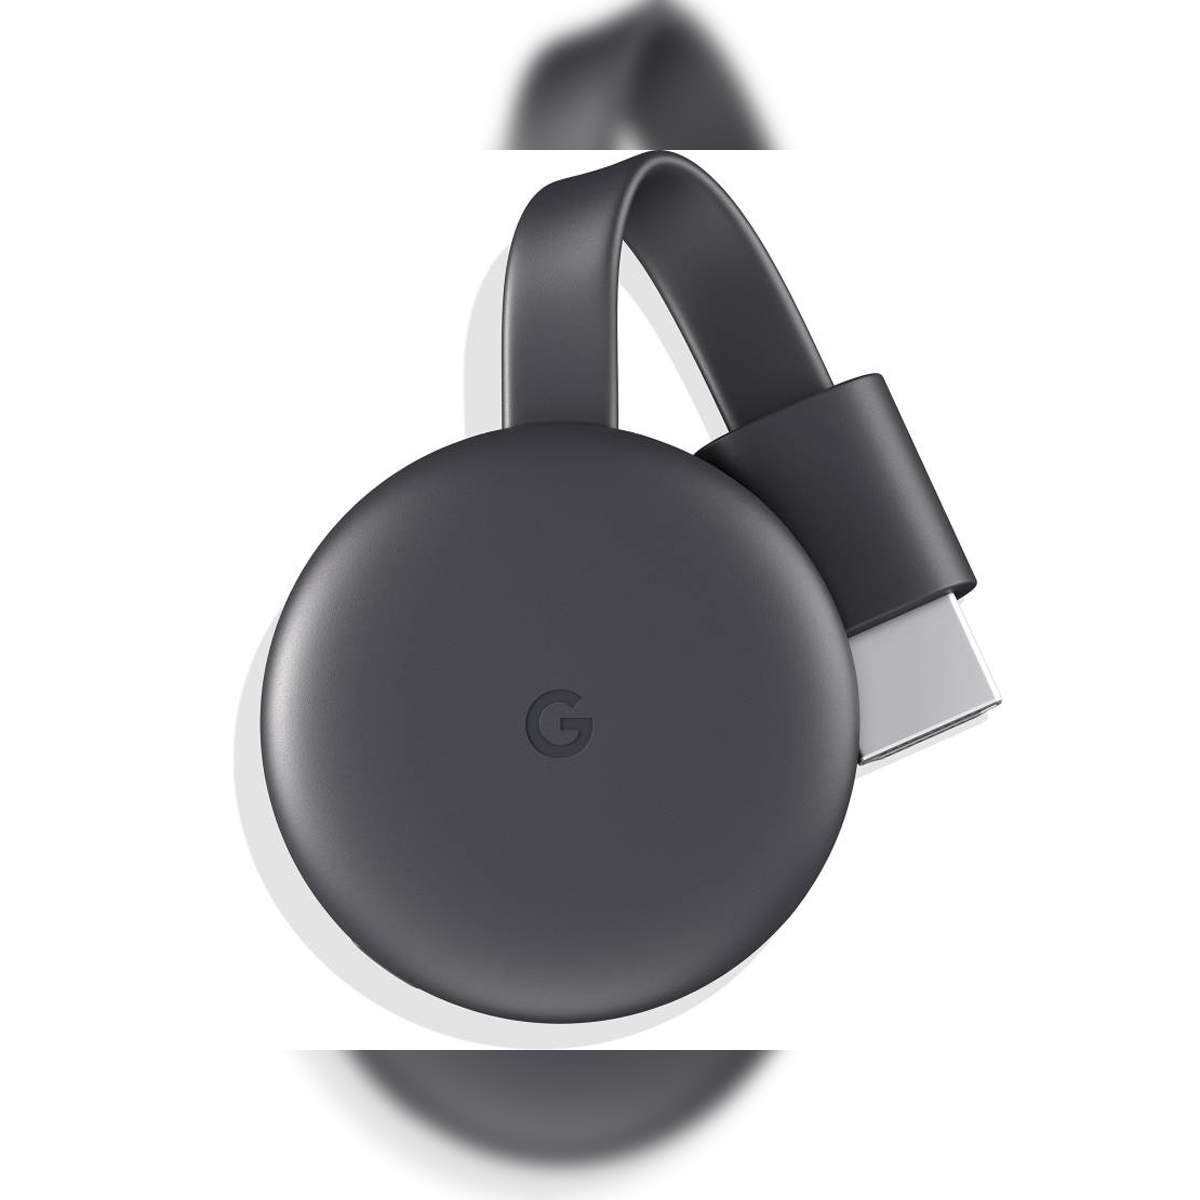 Chromecast with Google TV > Smart Devices > Expression Computers W.L.L